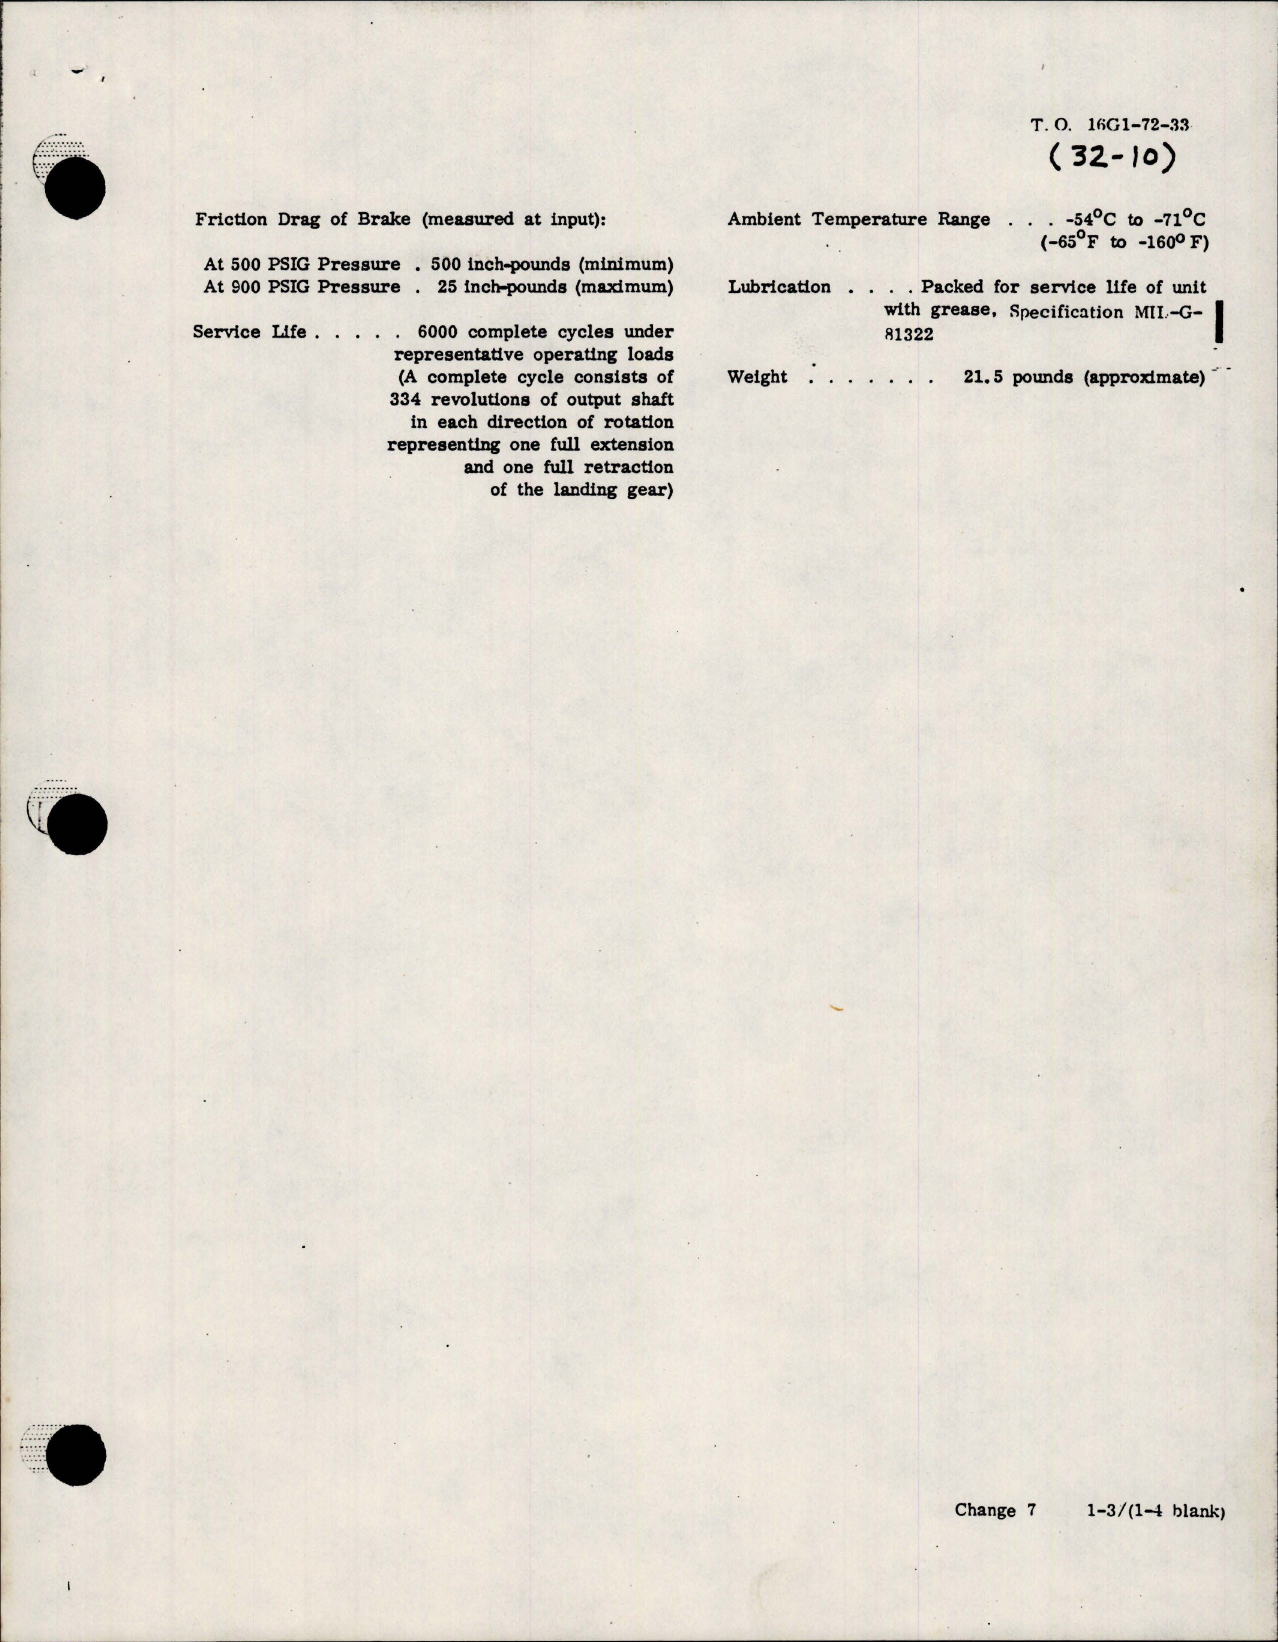 Sample page 5 from AirCorps Library document: Overhaul for Emergency Gear Box with Brake - Parts 1051R228, 1051R274, 1051R268 and 1051R300